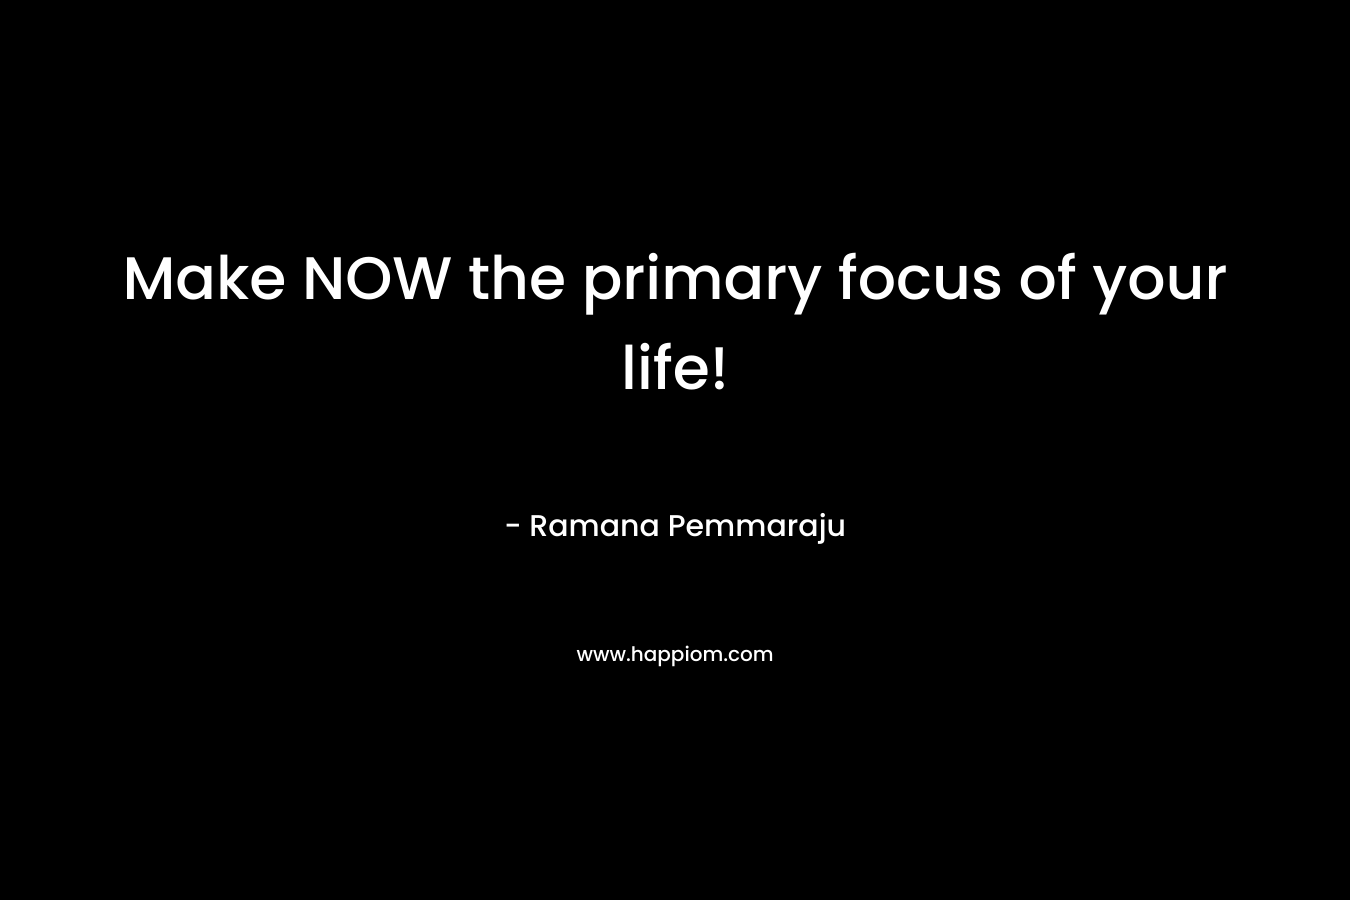 Make NOW the primary focus of your life!